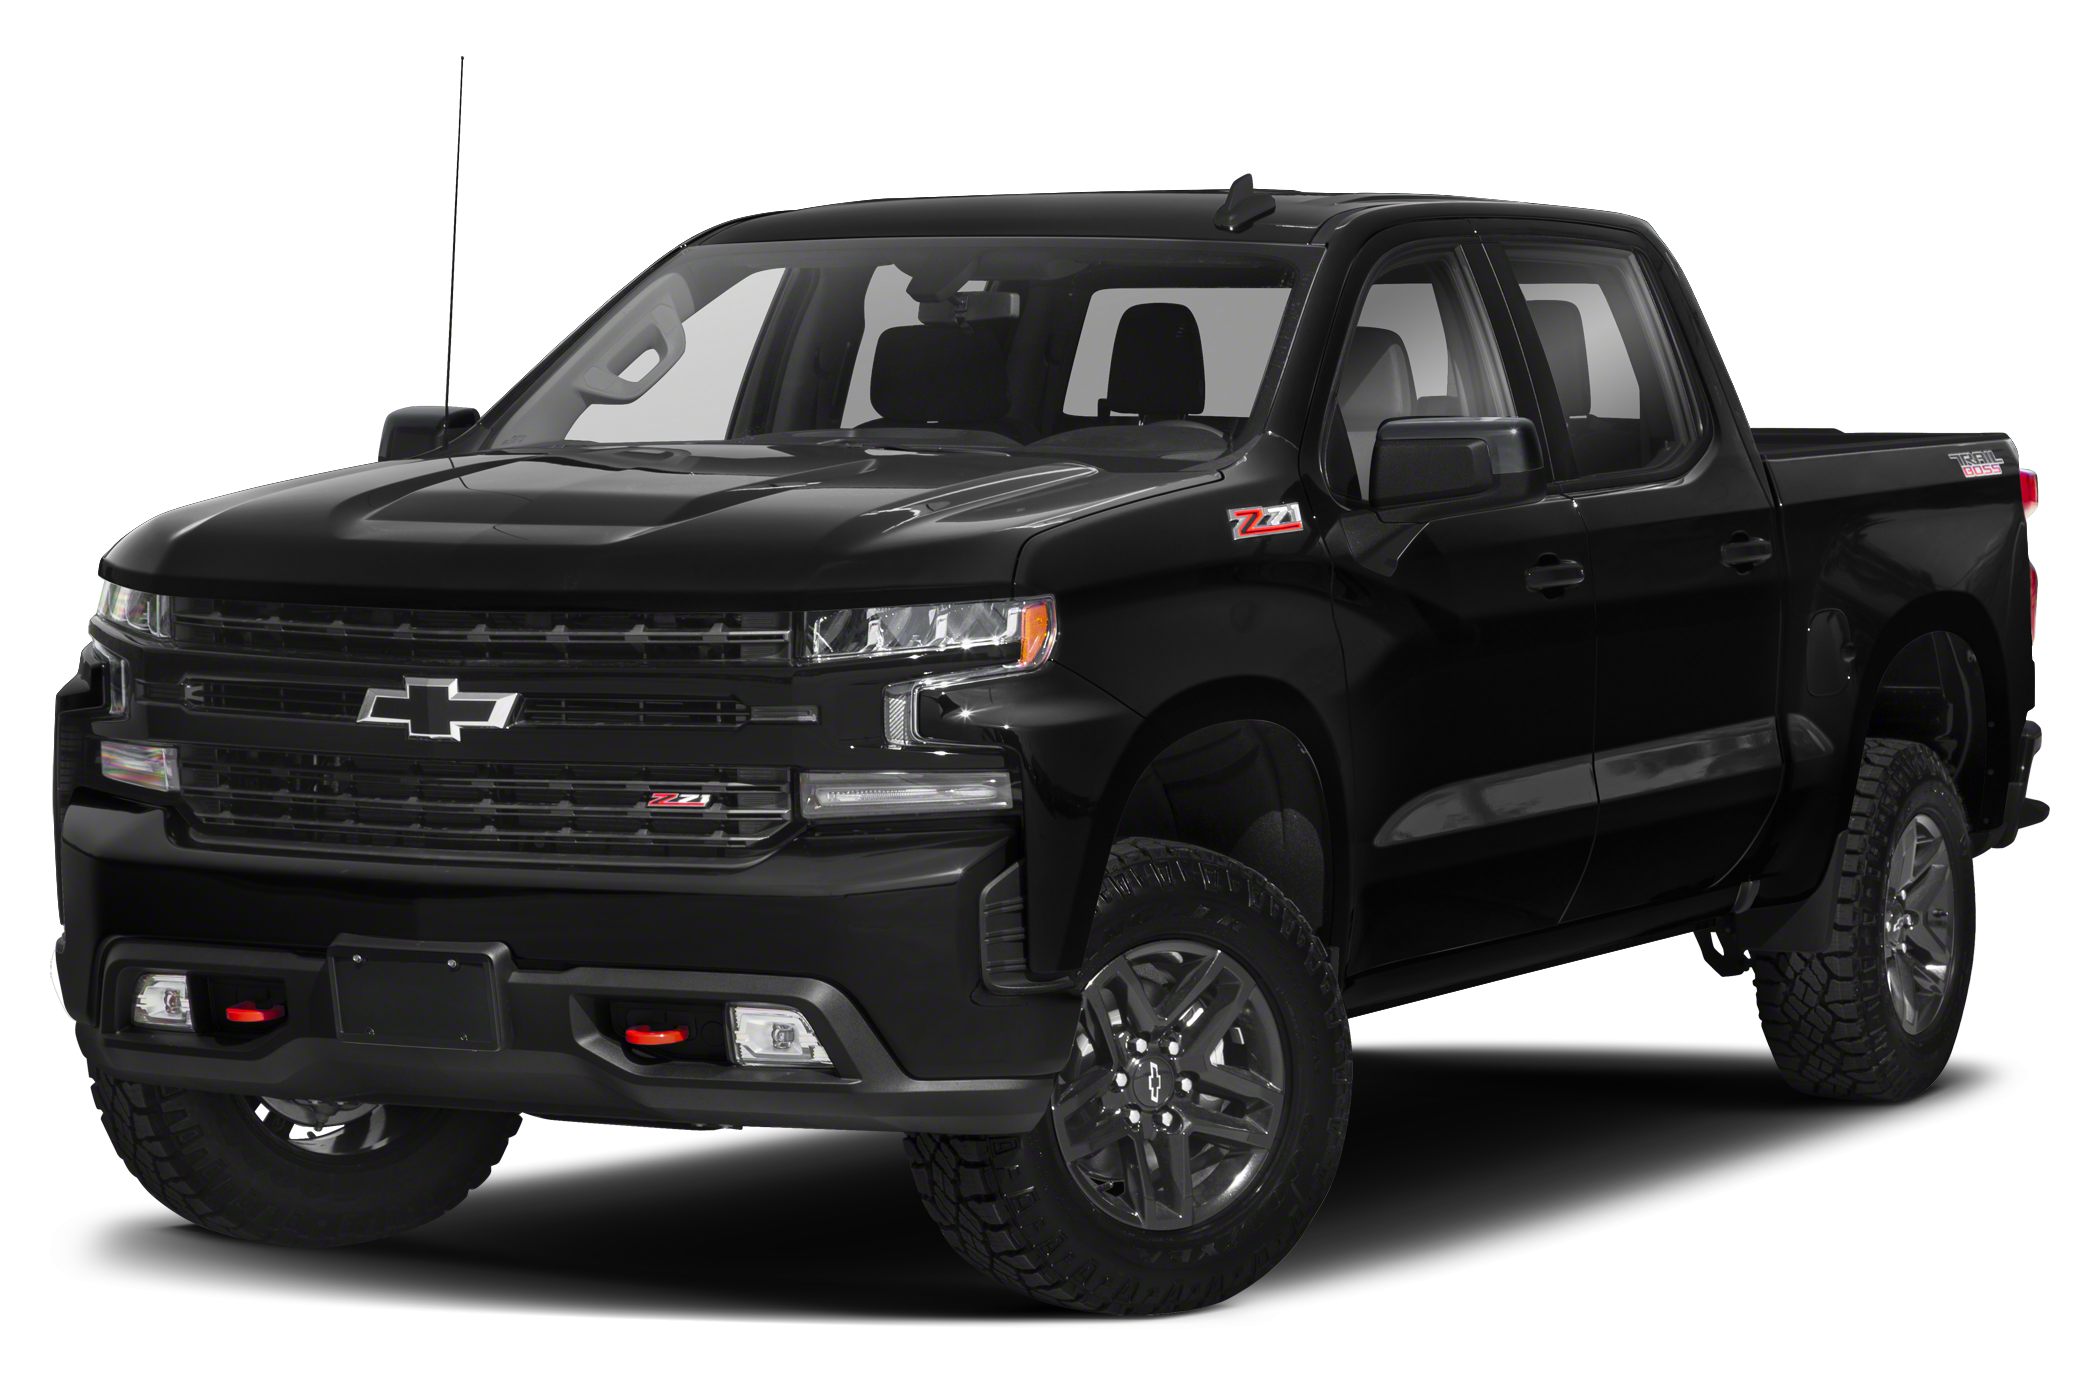 Chevrolet Silverado 1500 LT Trail Boss 4x4 Crew Cab 6.6 ft. box 157 in. WB Pricing and Options